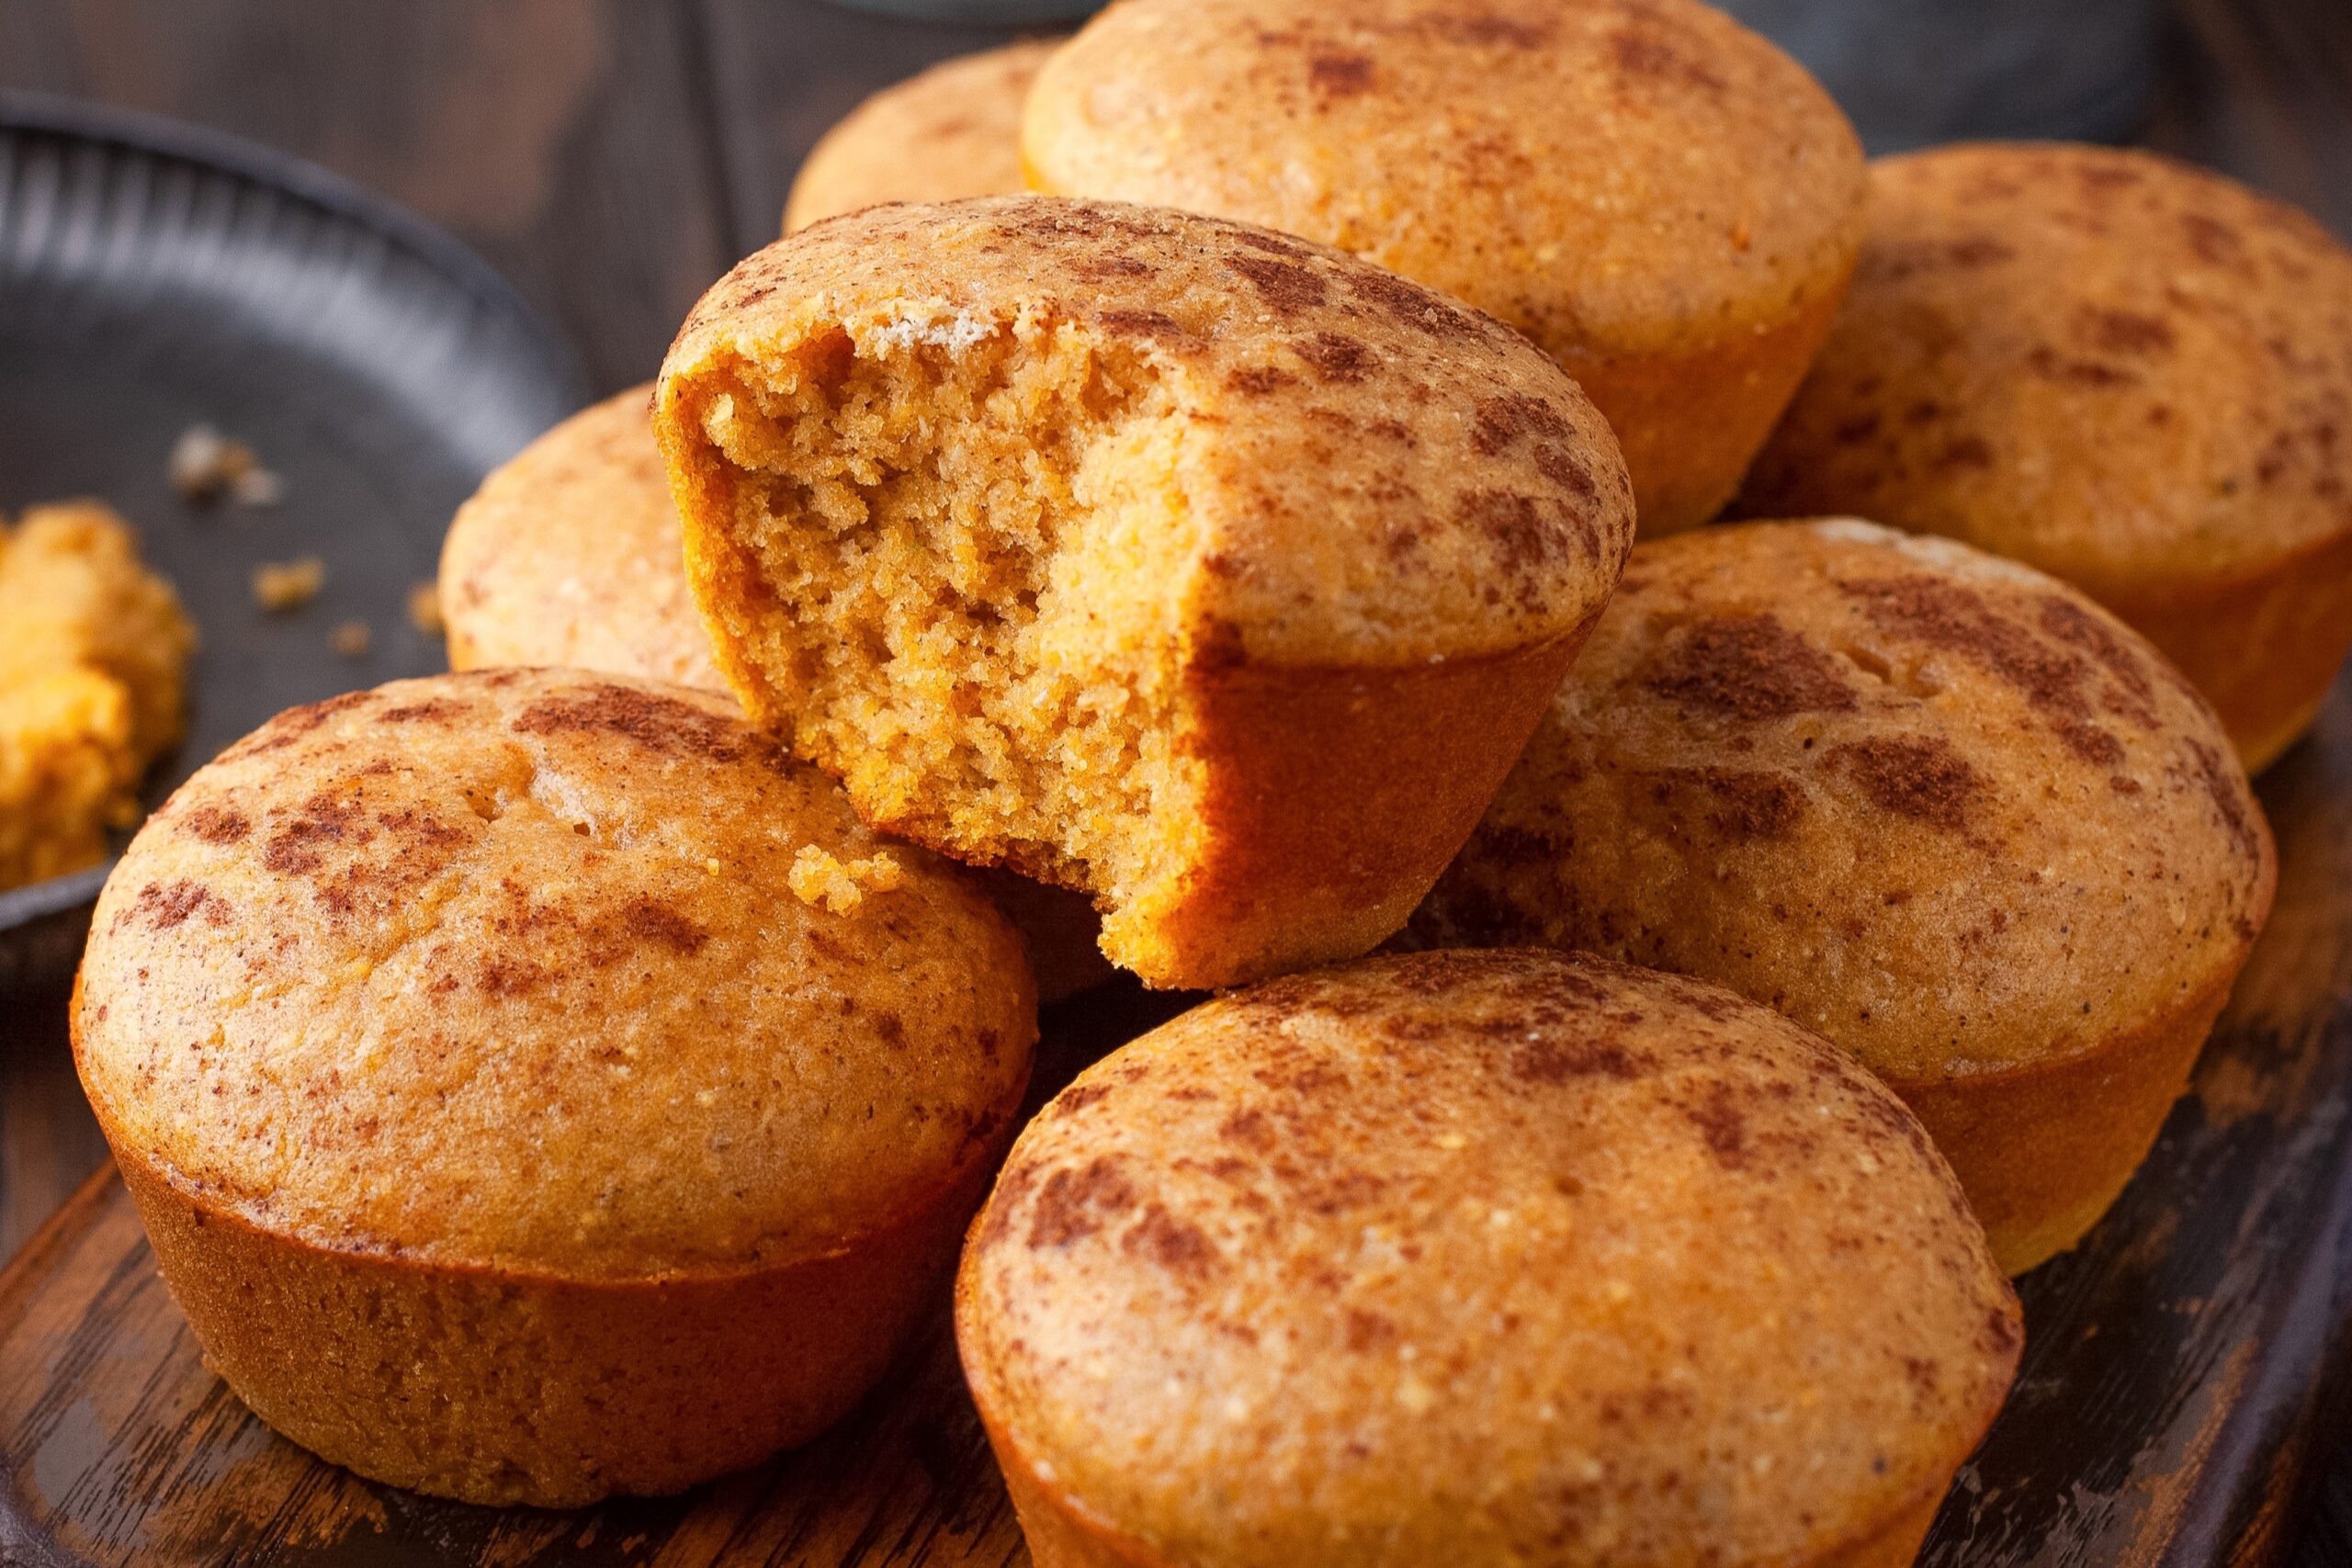 Fall is the perfect time to enjoy pumpkin recipes, and this recipe for pumpkin cornbread muffins is a delicious way to get your fix.